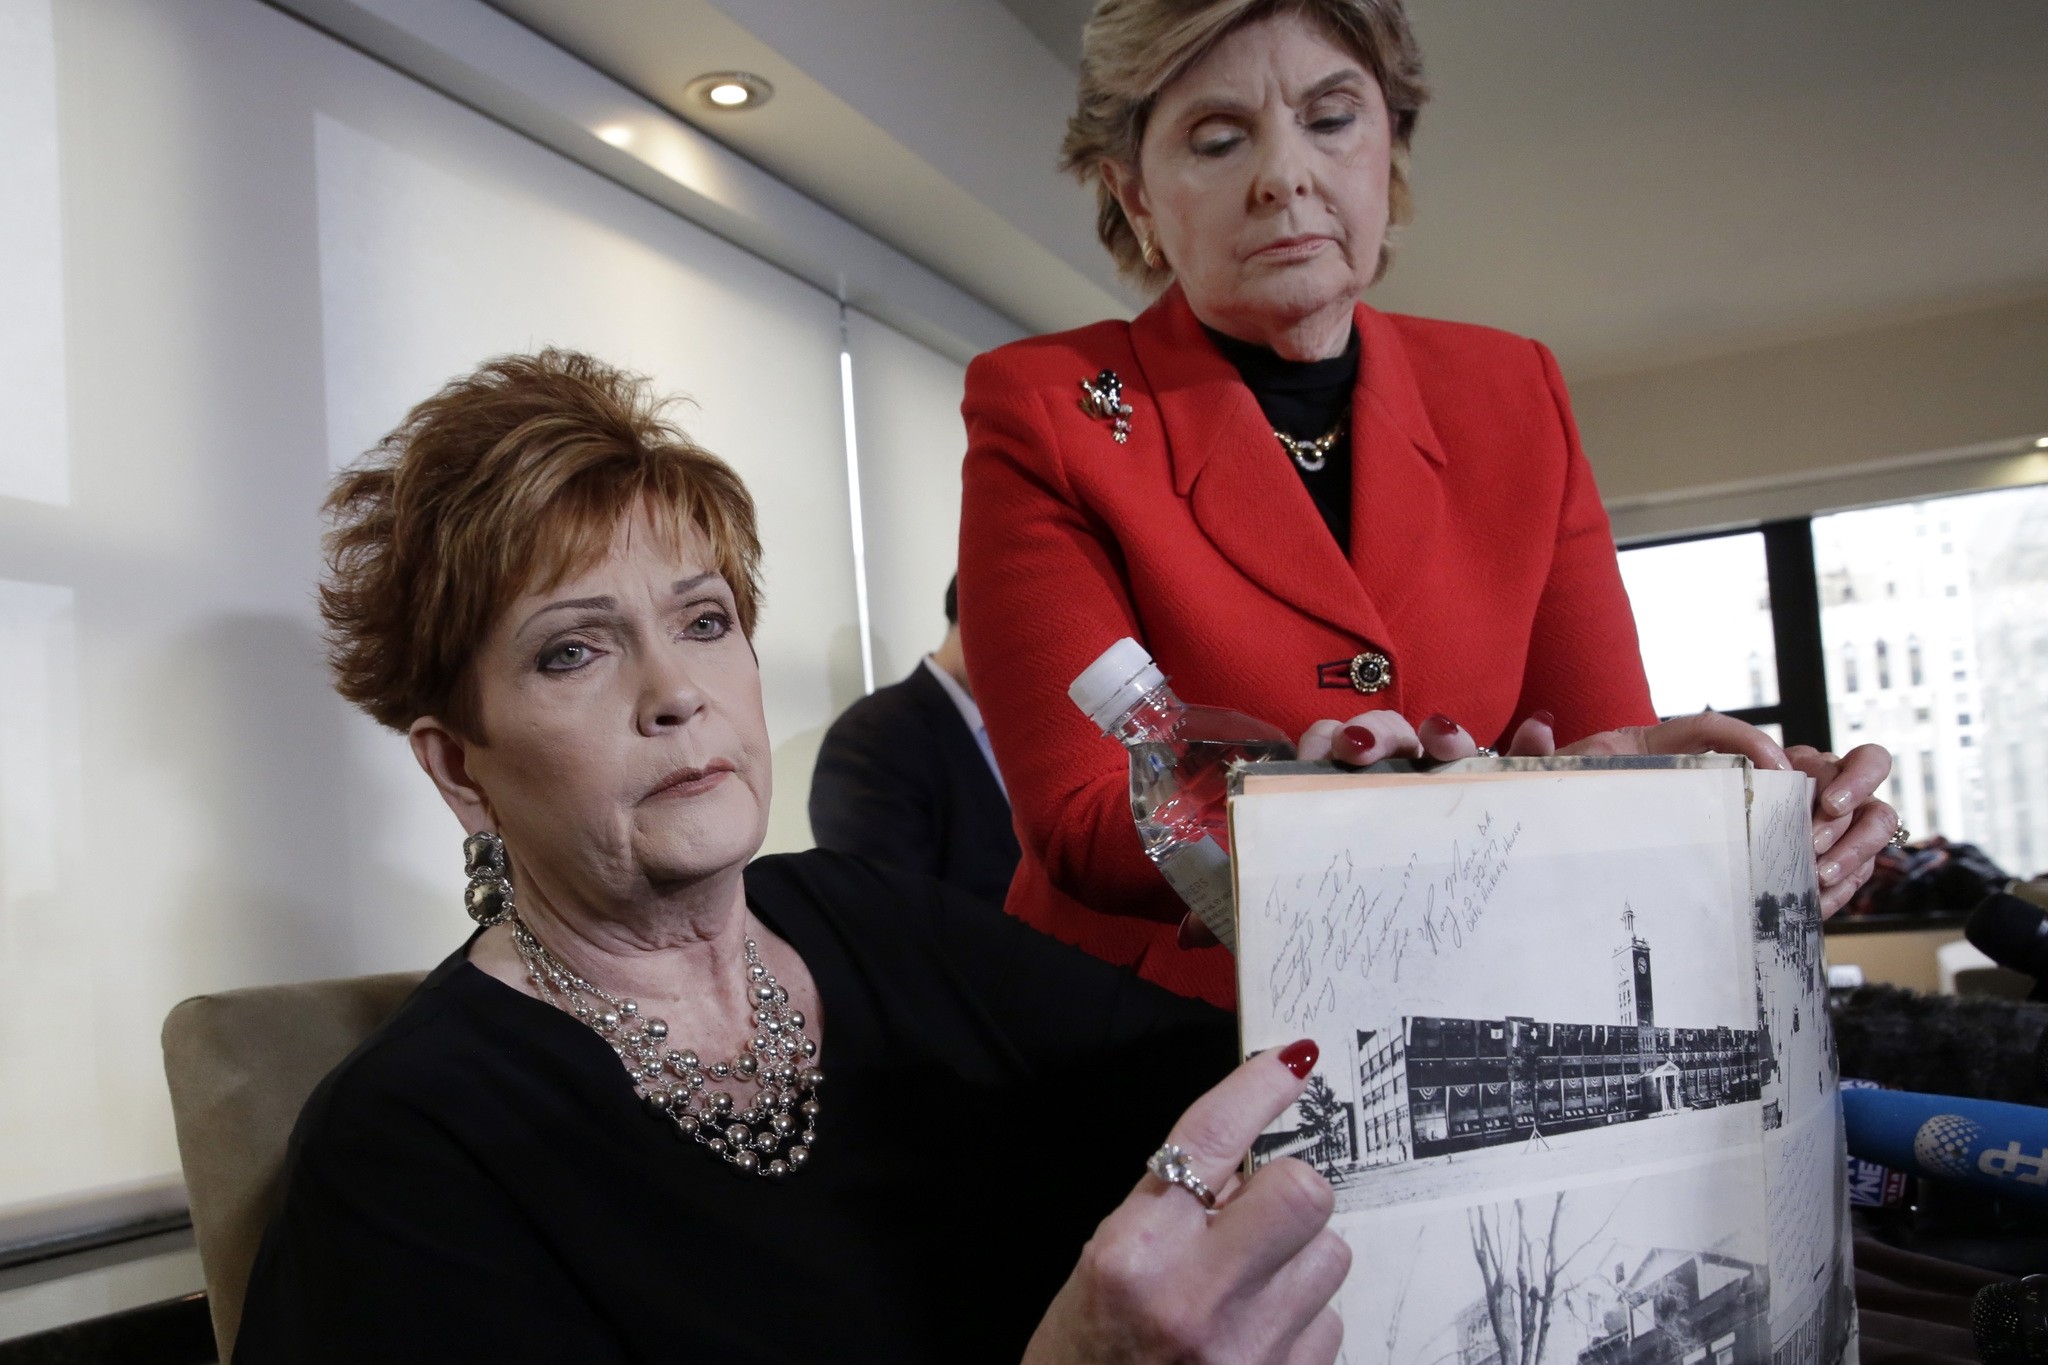 Beverly Young Nelson, left, and attorney Gloria Allred hold Nelson's high school yearbook, signed by Roy Moore, at a news conference, in New York, Monday, Nov. 13, 2017. (AP Photo)